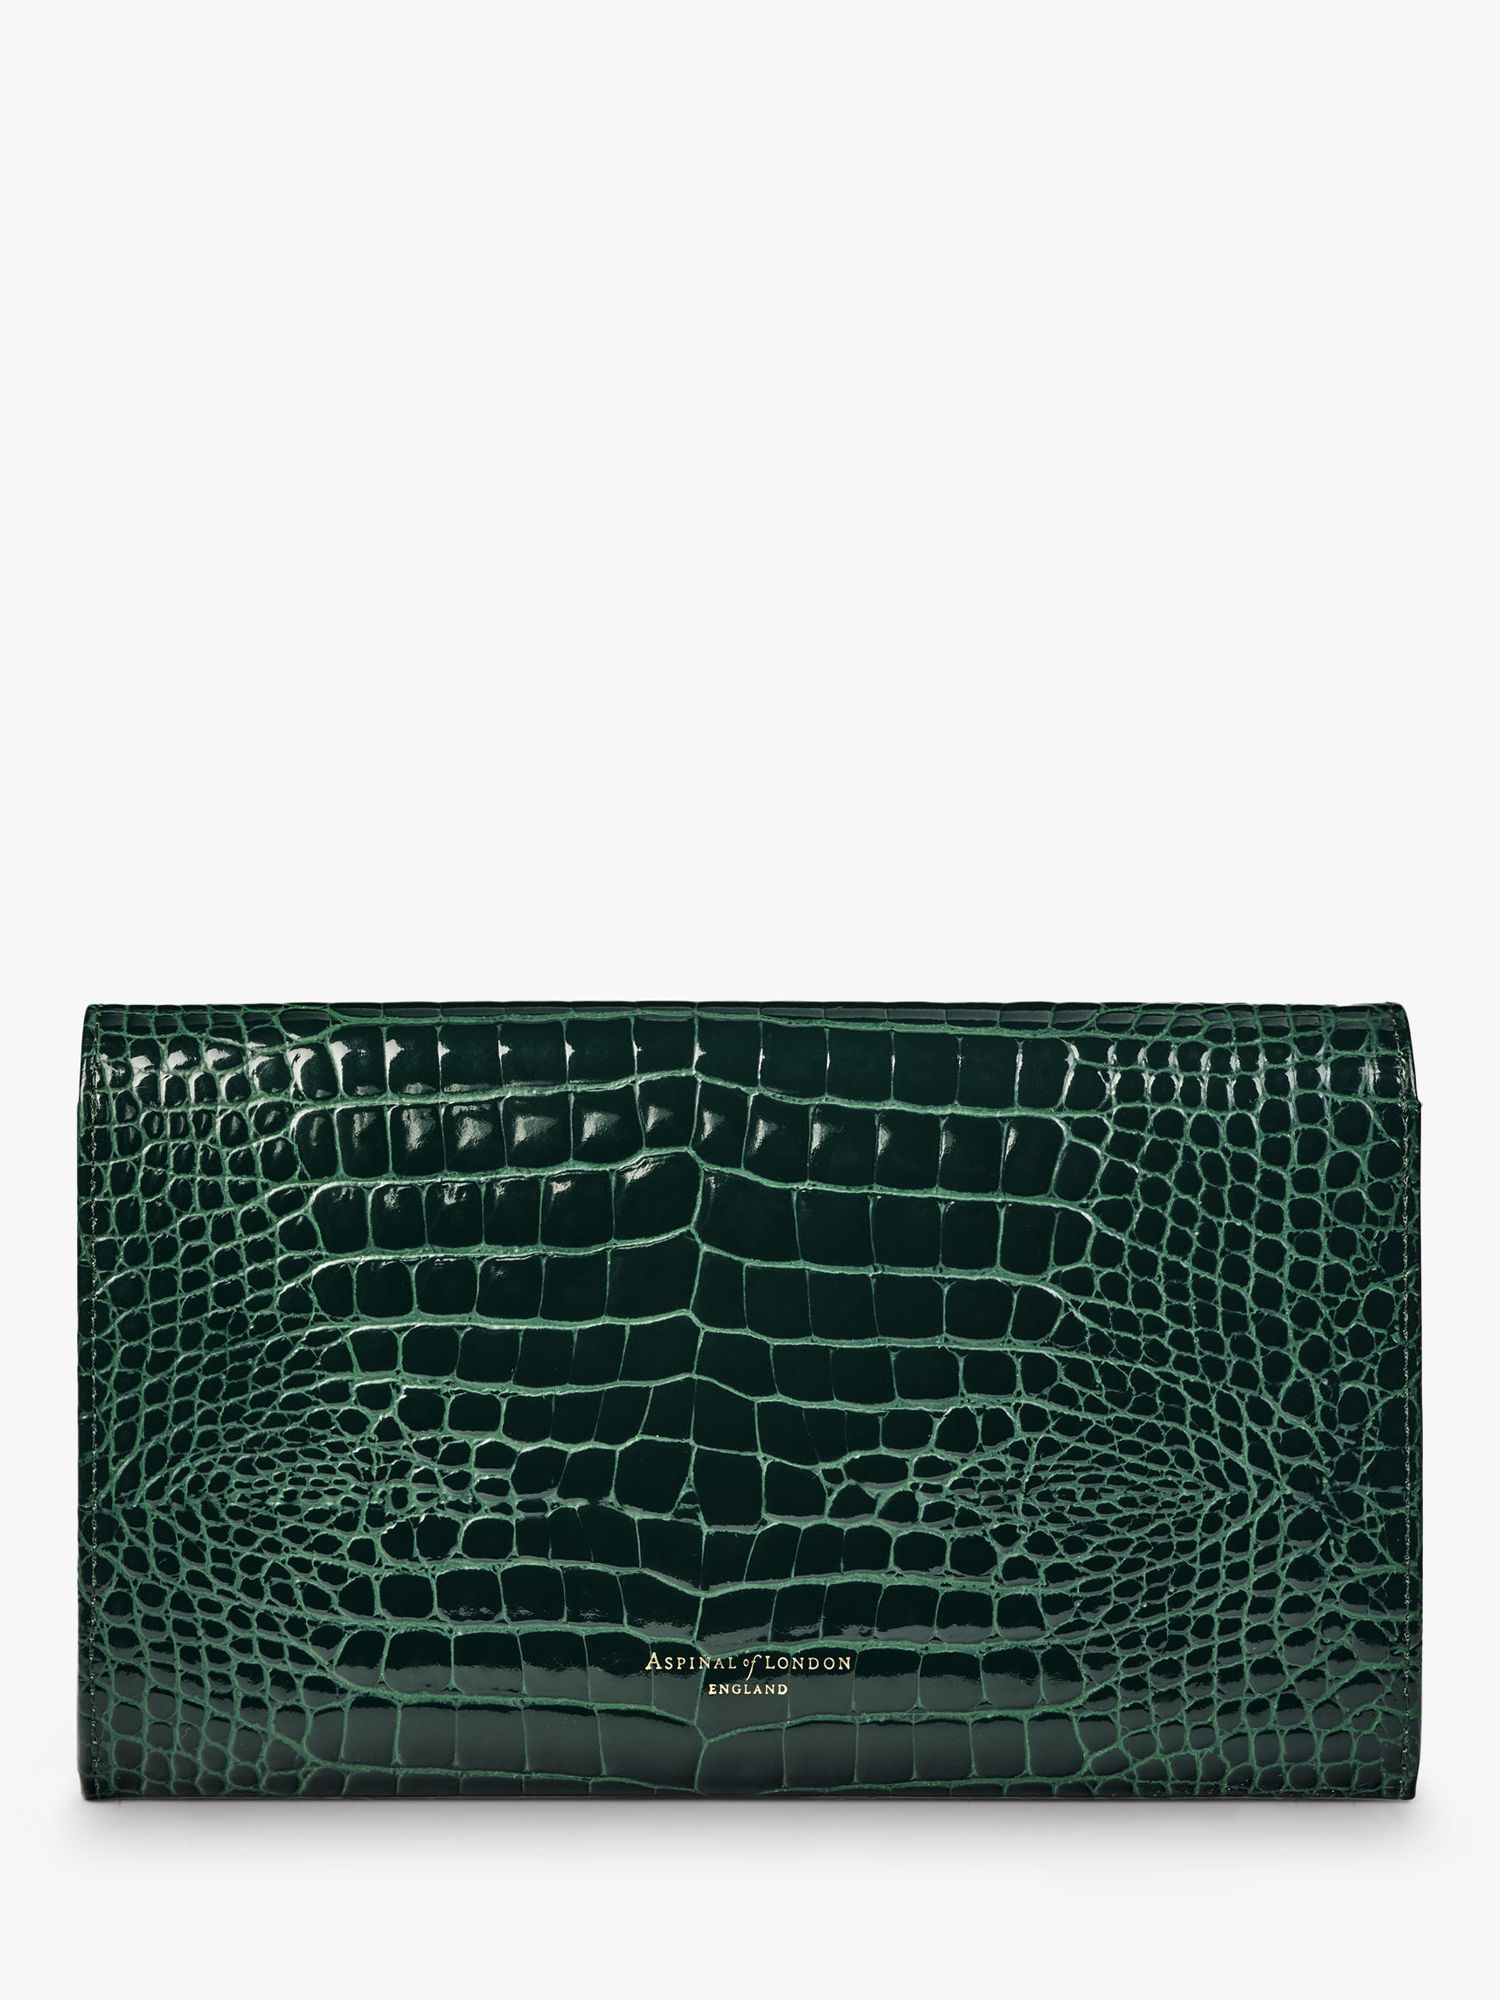 Aspinal of London Croc Effect Leather Travel Wallet, Evergreen